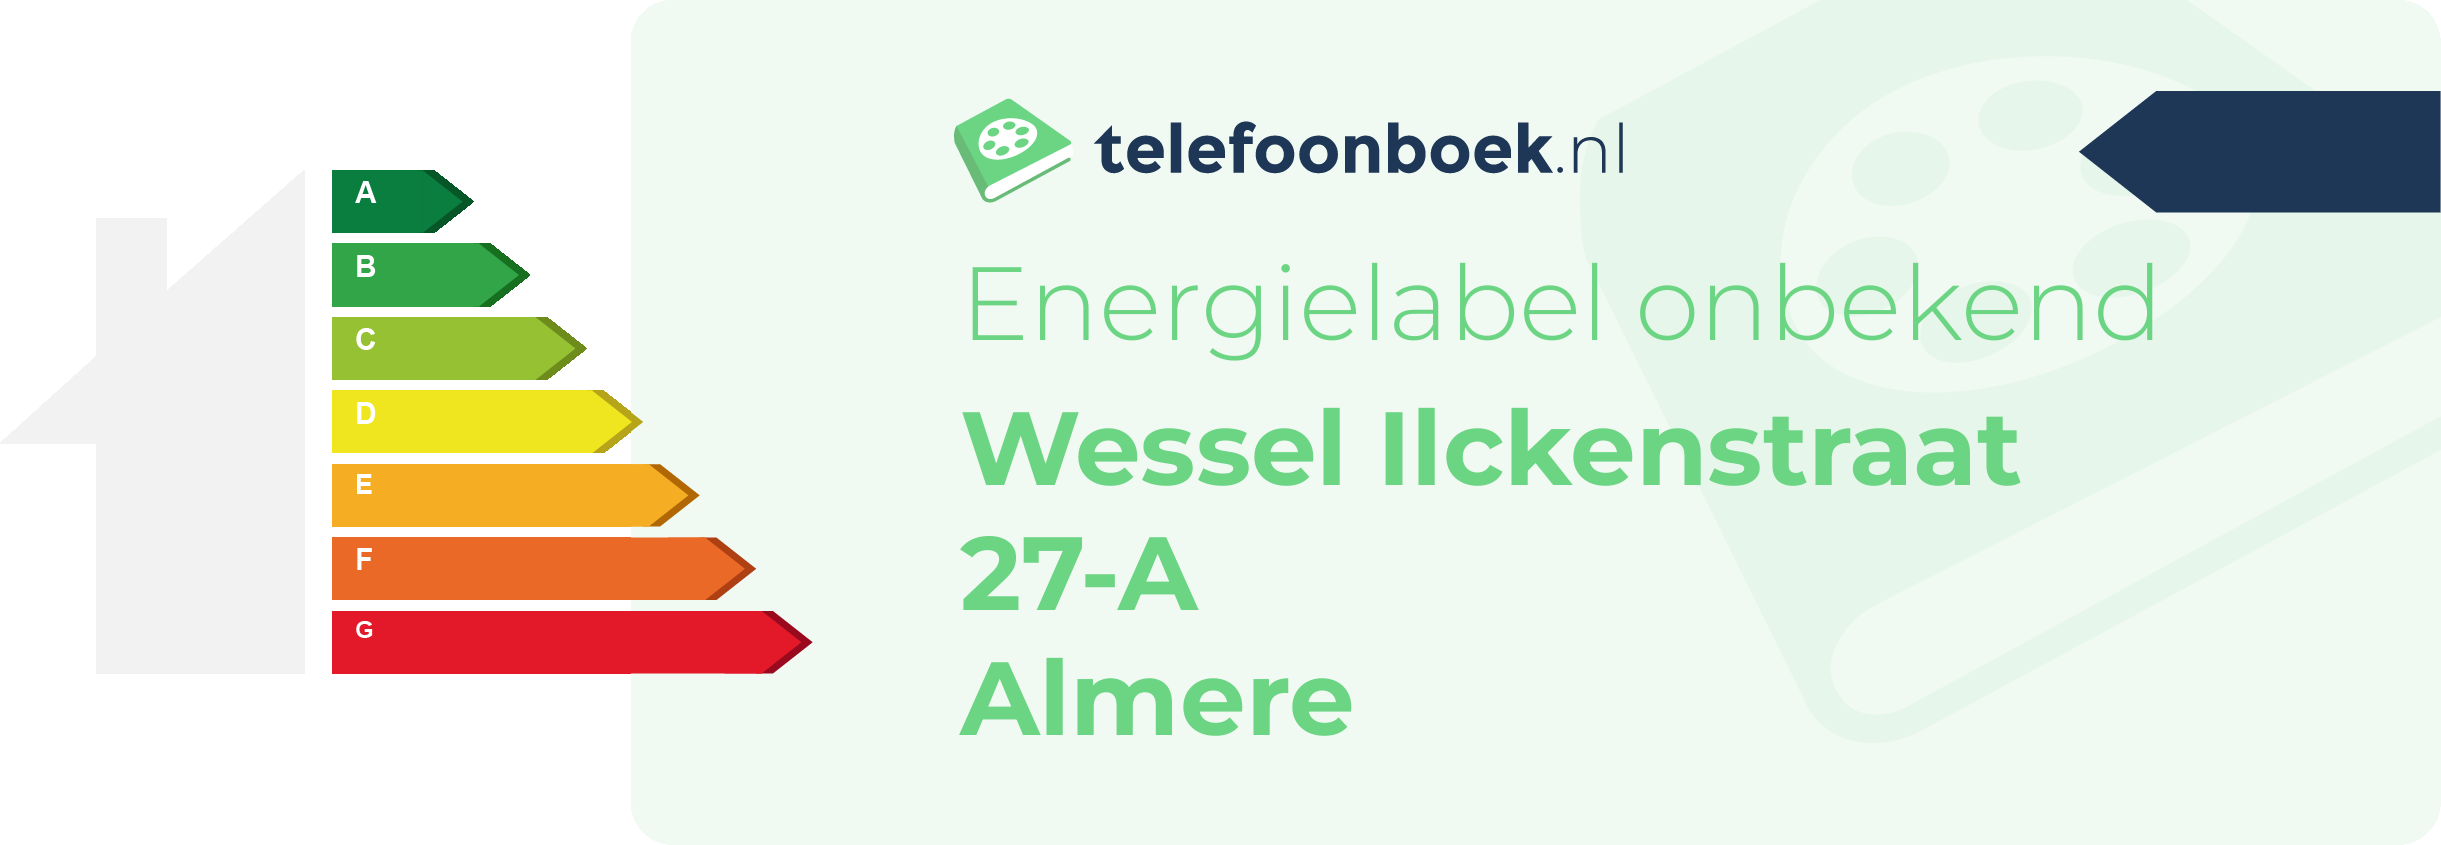 Energielabel Wessel Ilckenstraat 27-A Almere